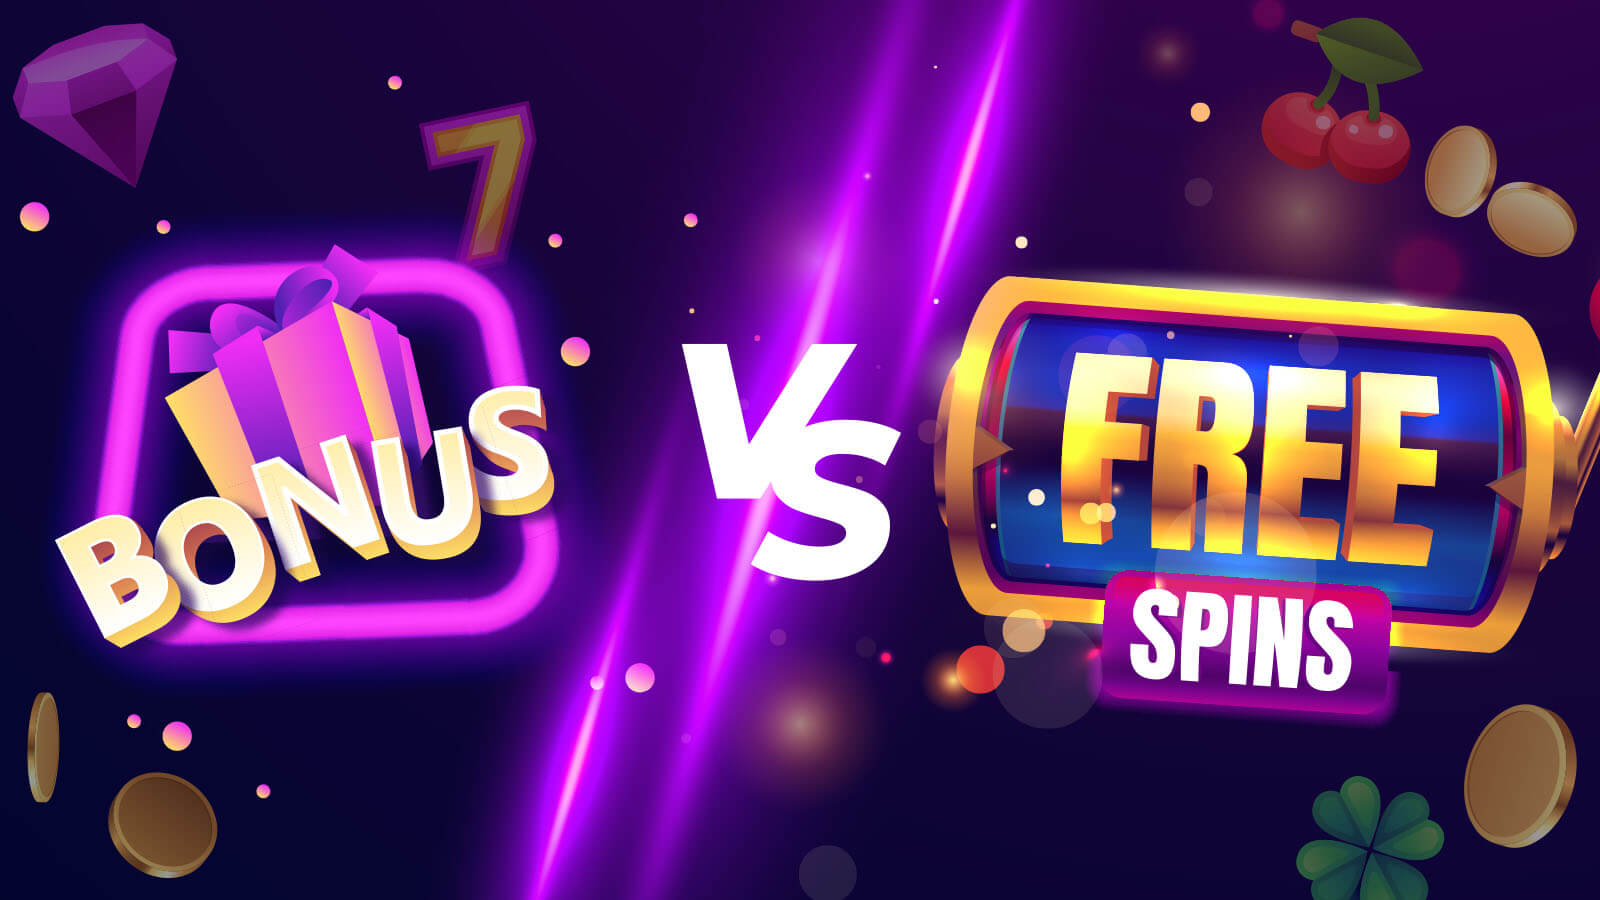 Bonus vs Free Spins: Which Offers Better Value for UK Players?